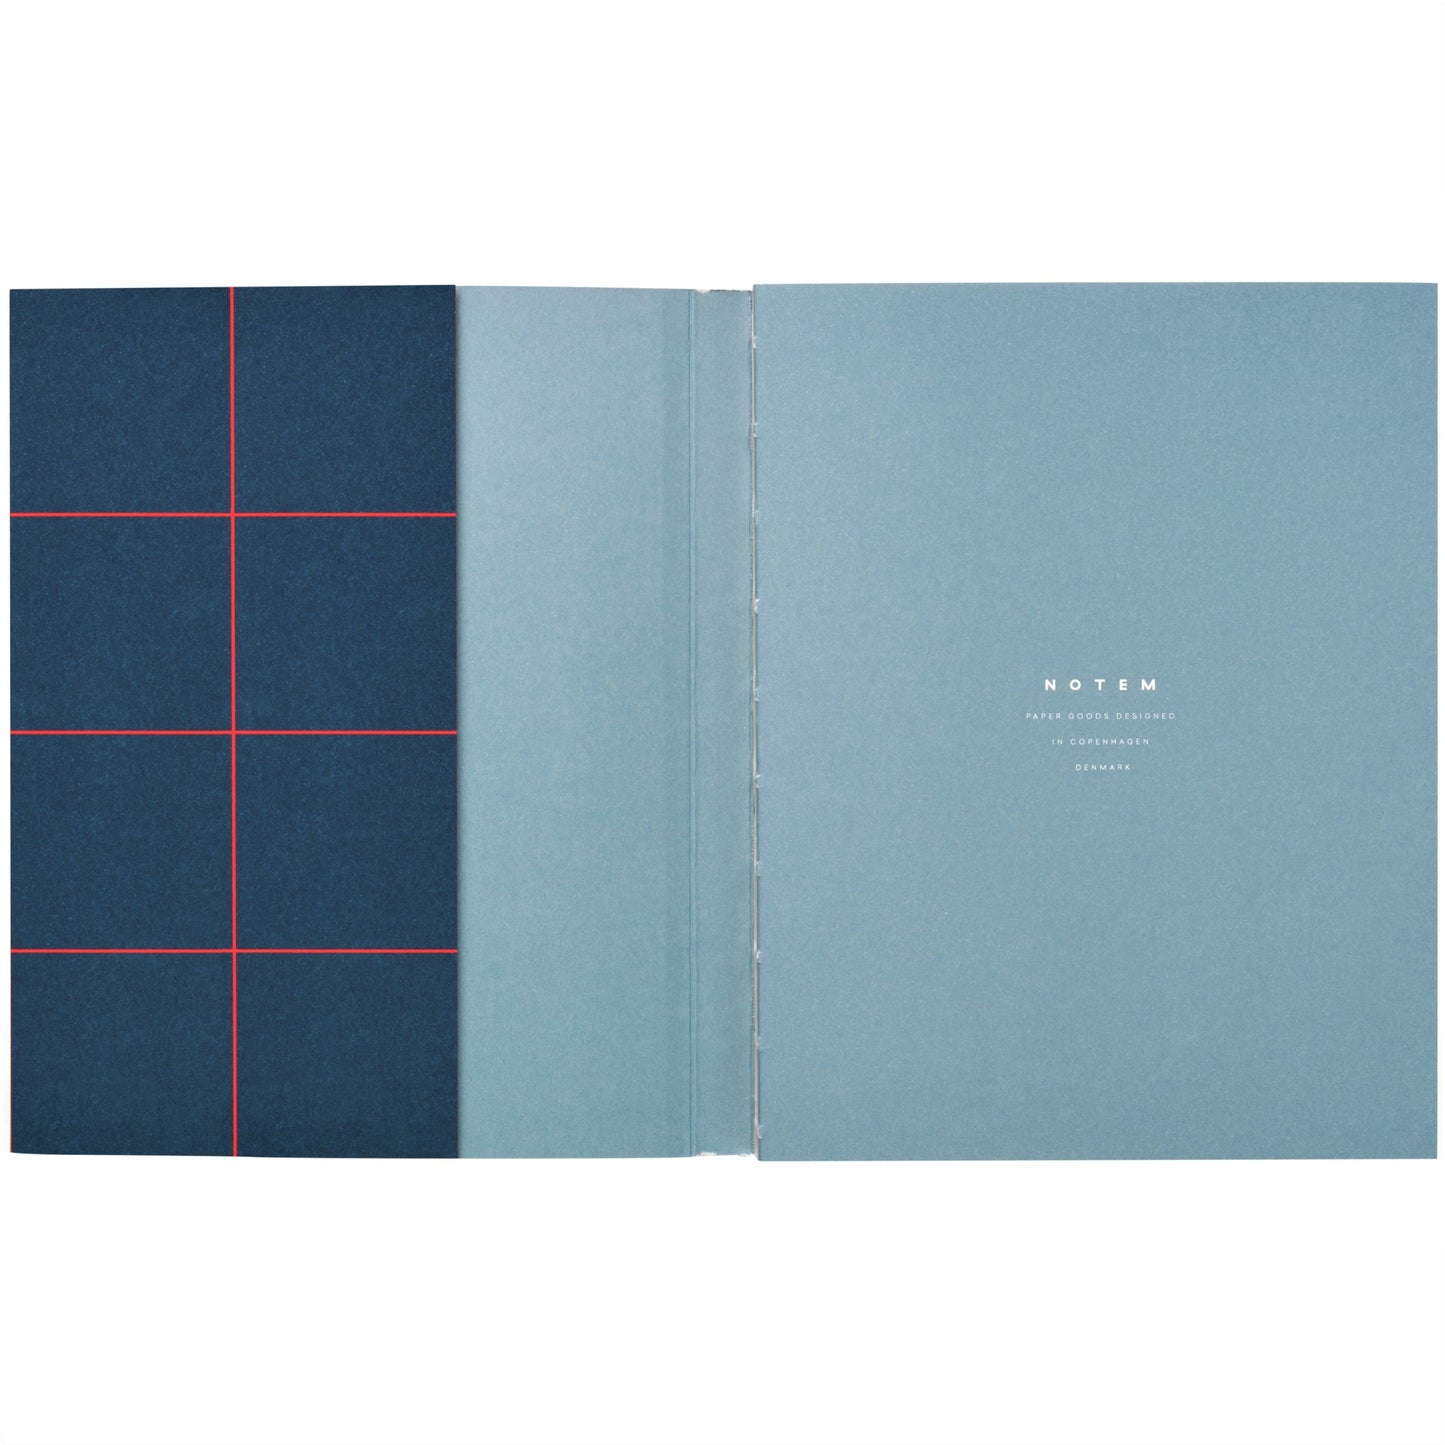 Layflat notebook with dark blue softcover with red grid lines, pictured open